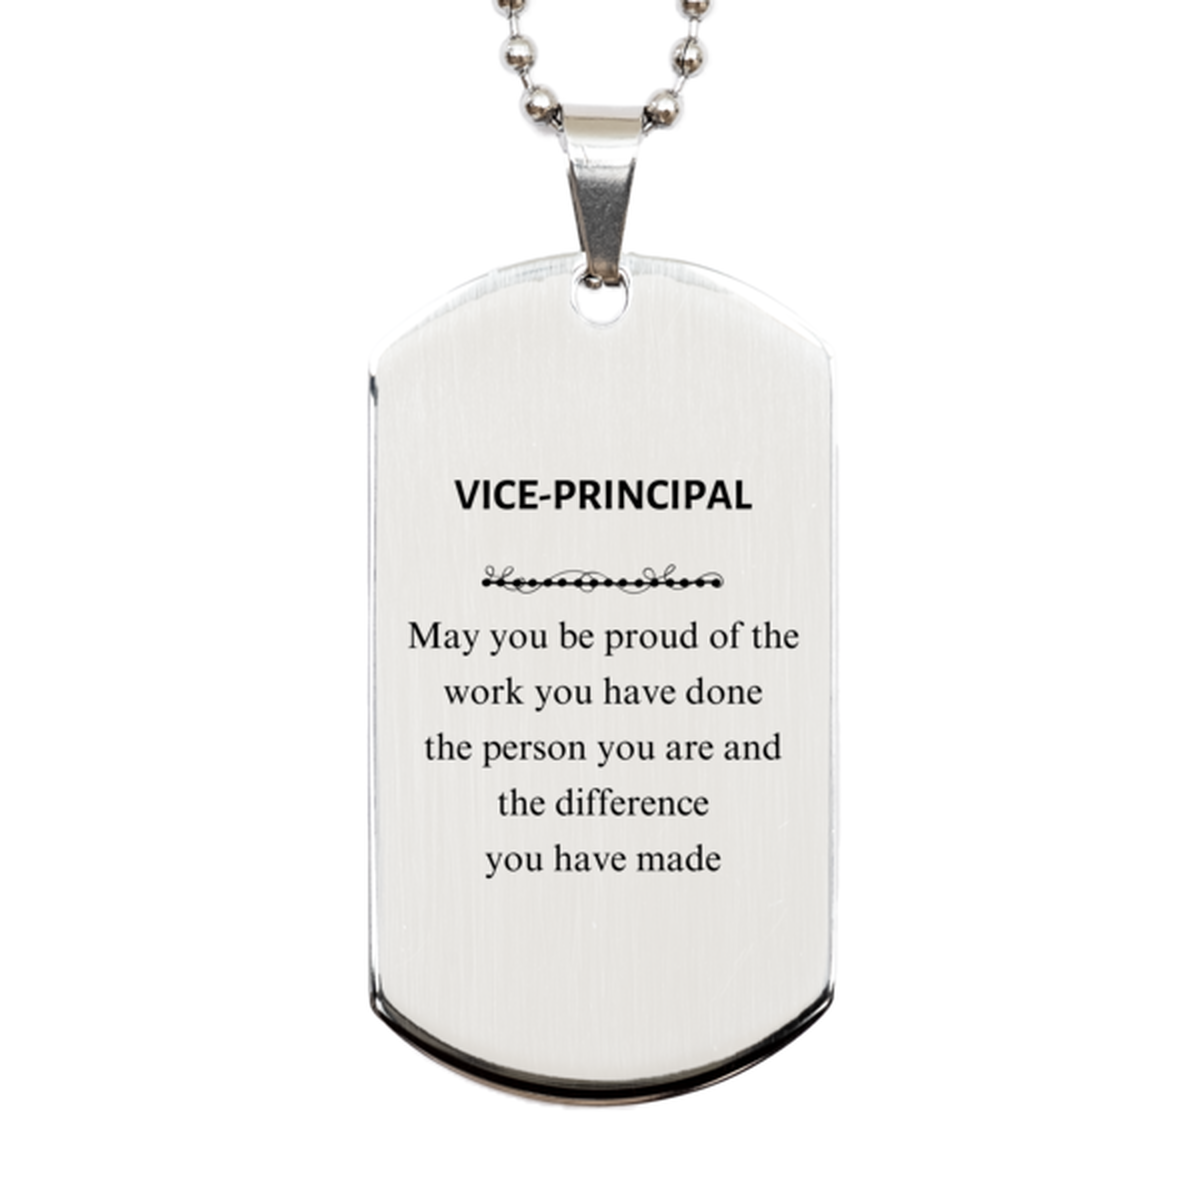 Vice-principal May you be proud of the work you have done, Retirement Vice-principal Silver Dog Tag for Colleague Appreciation Gifts Amazing for Vice-principal